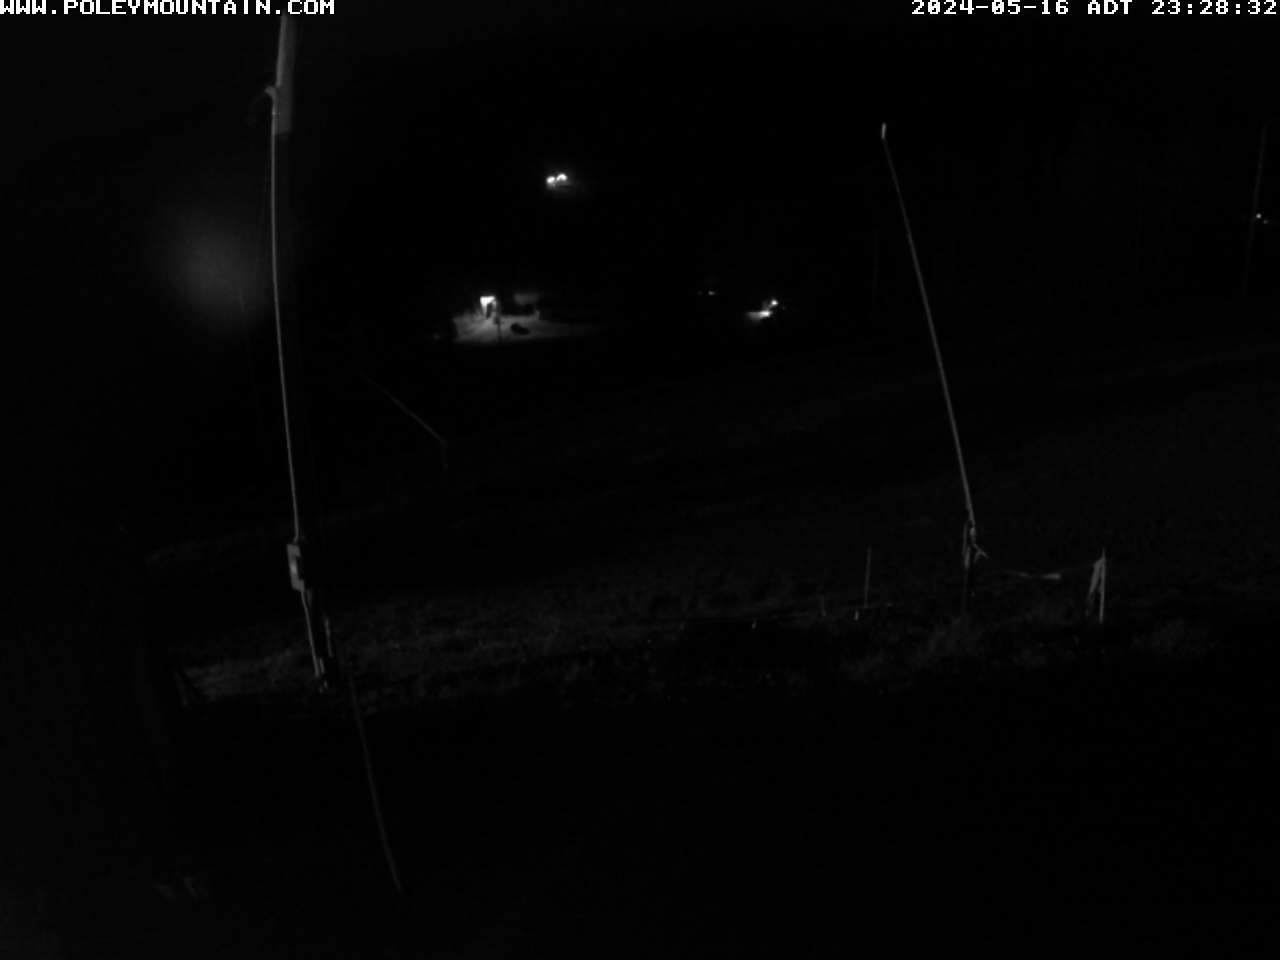 Web Cam image of Sussex (Poley Mountain)